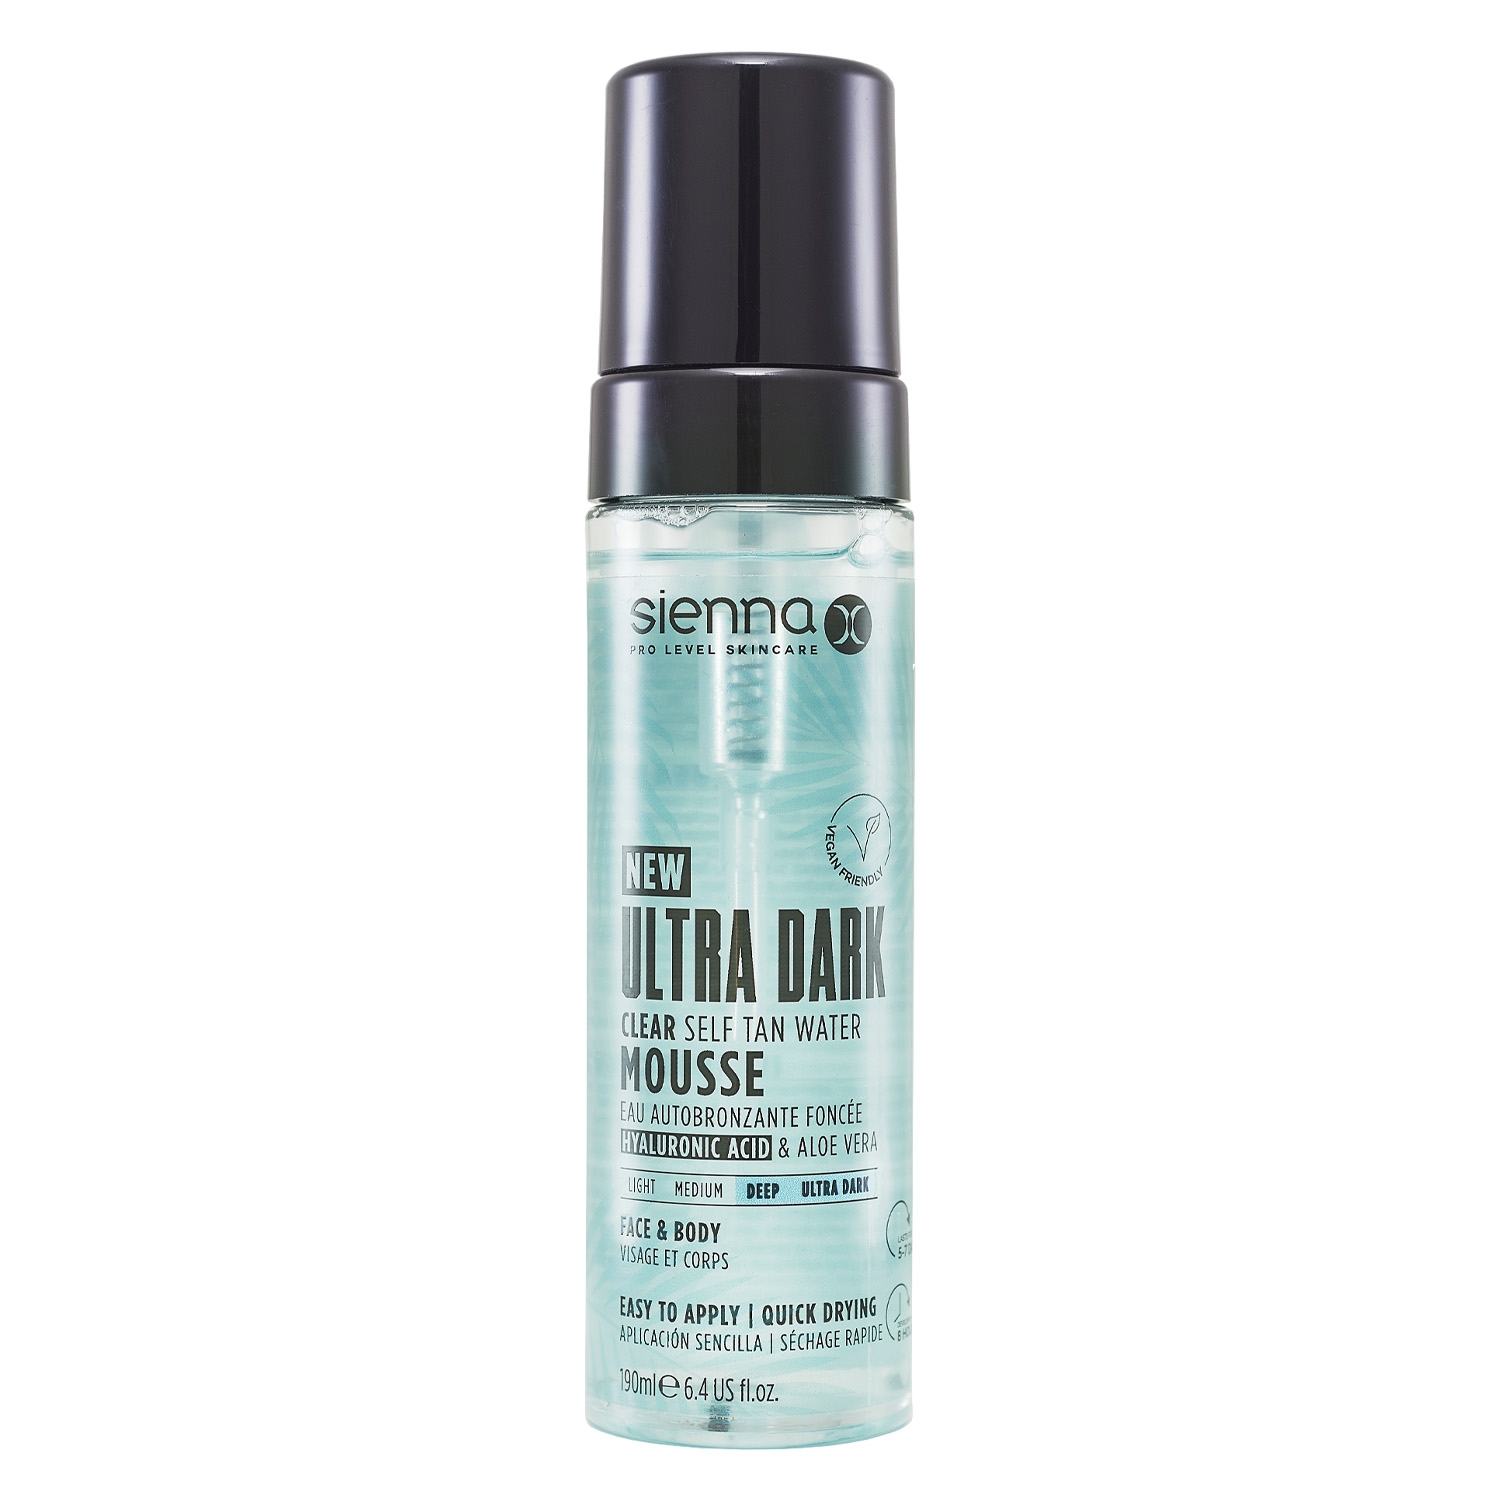 Product image from sienna x - Ultra Dark Clear Self Tan Water Mousse